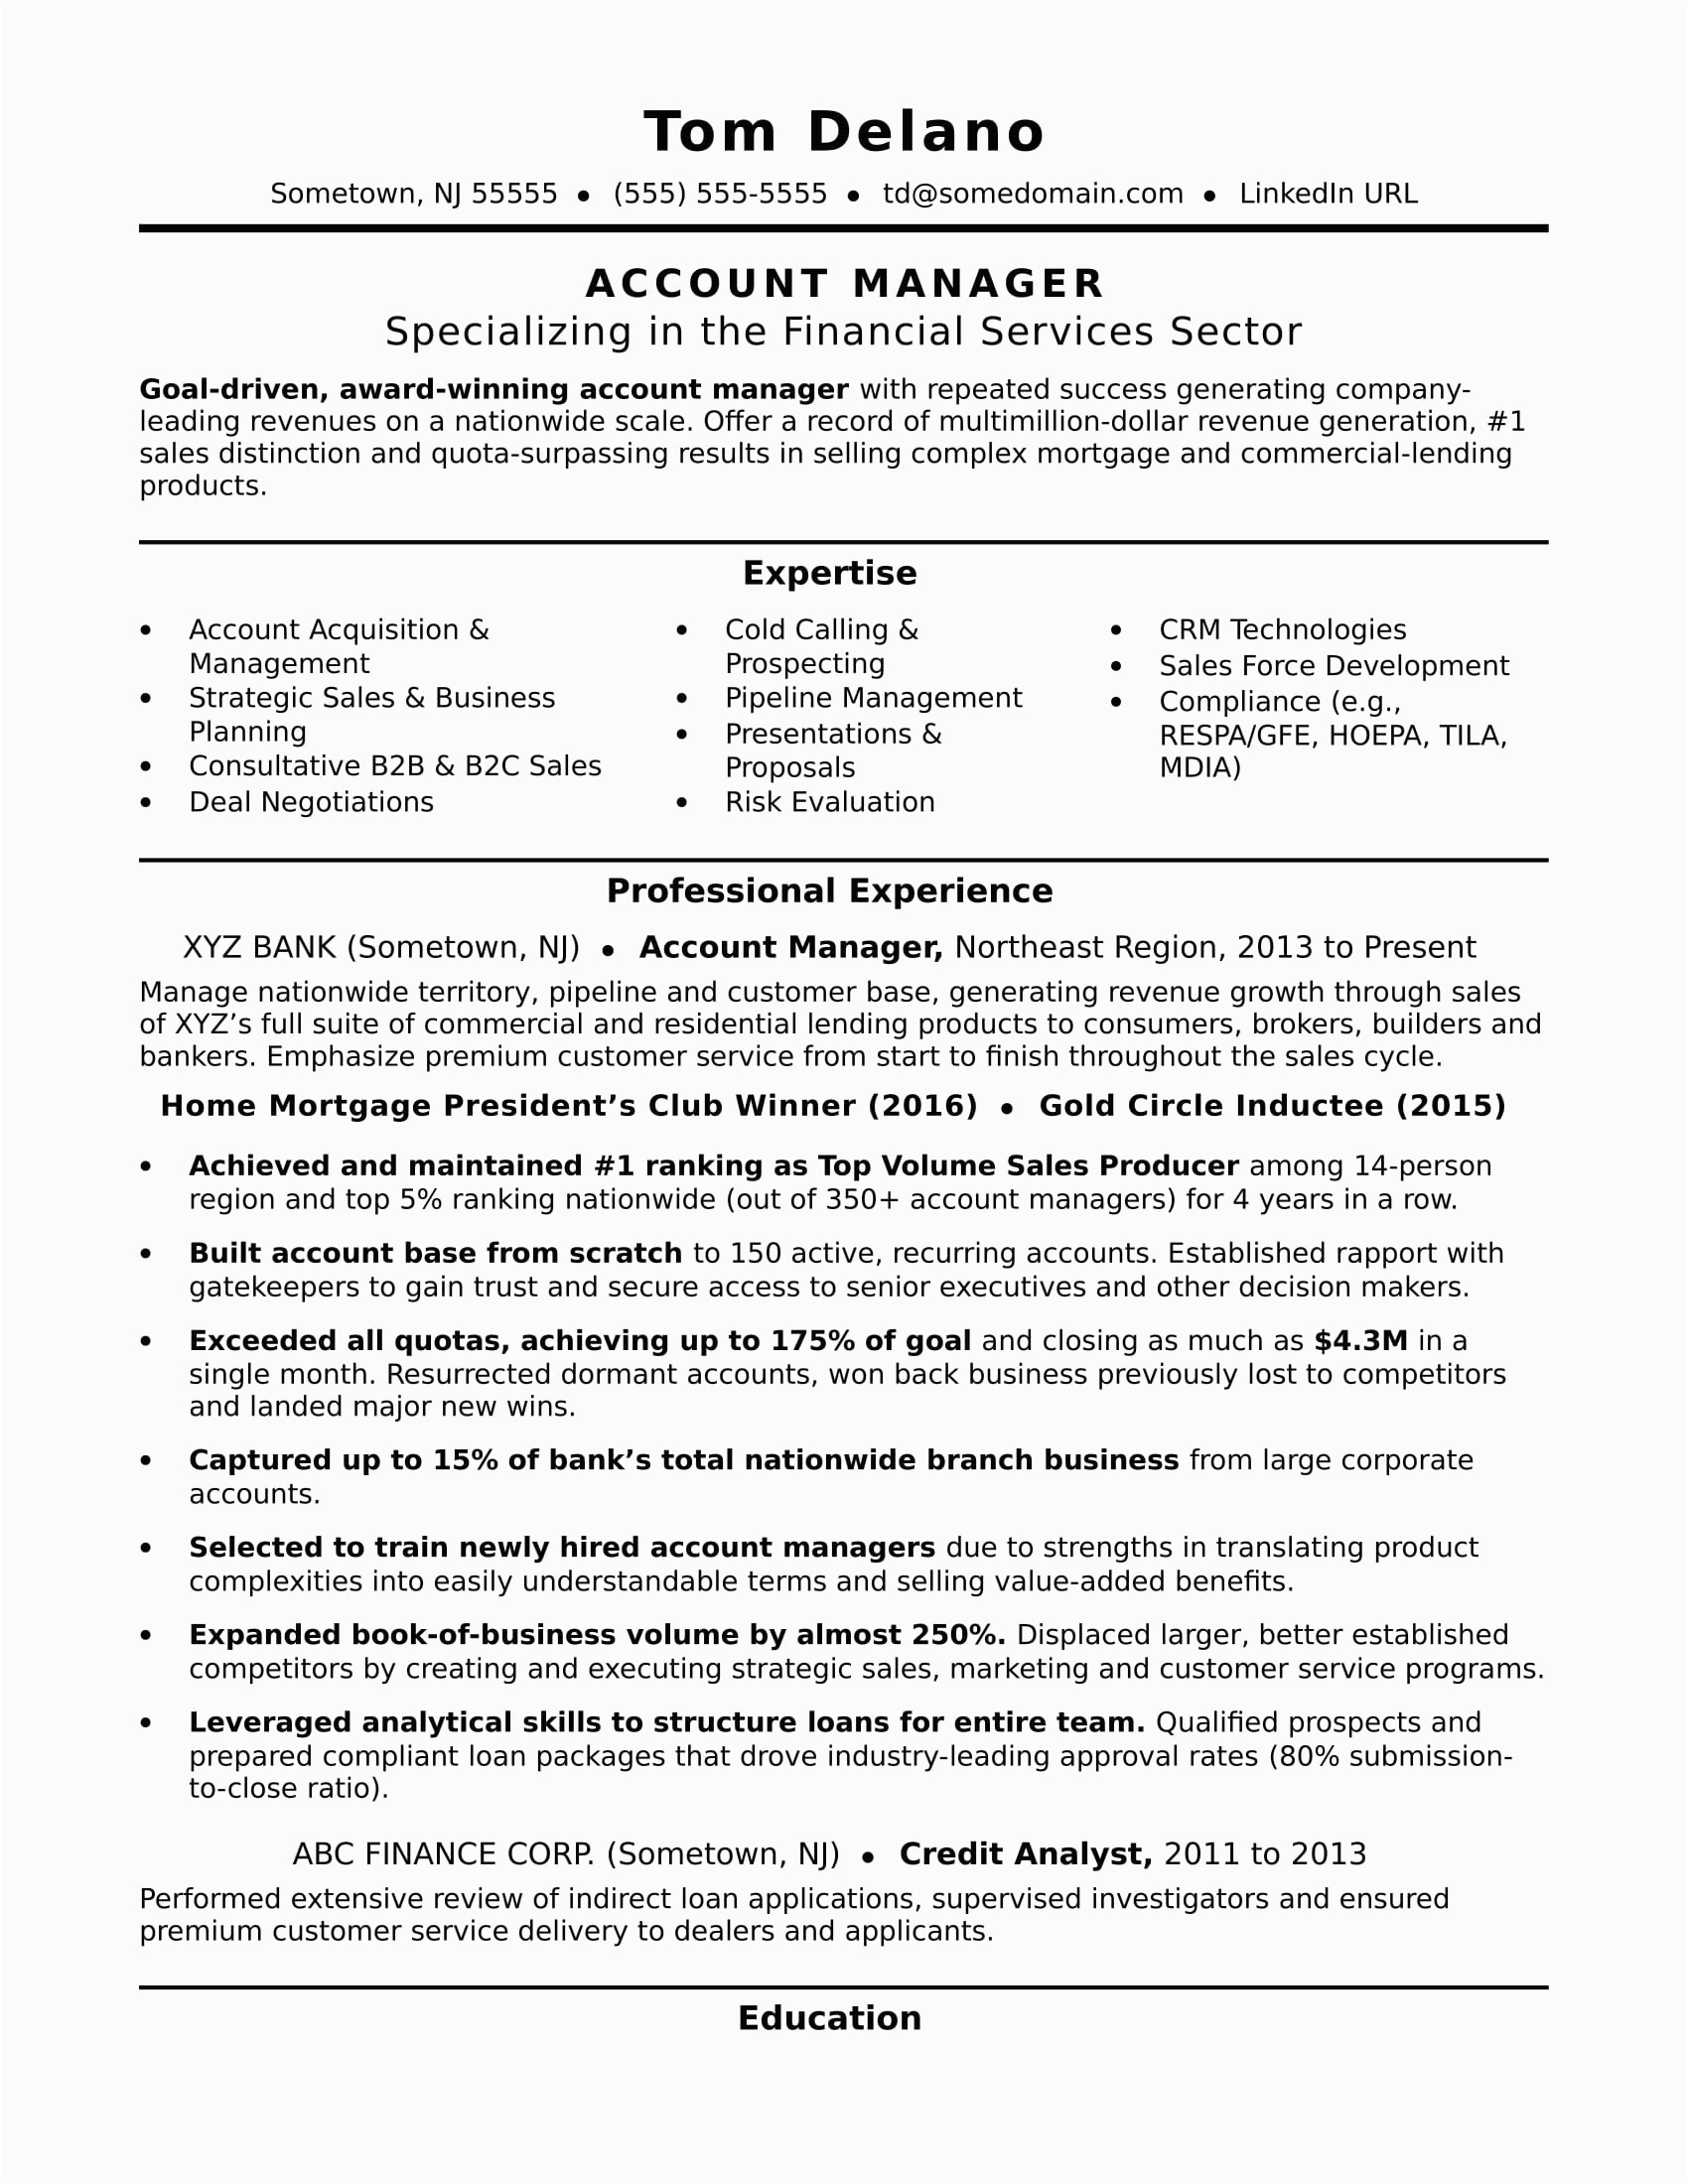 Resume Samples for Us Accounting Jobs Account Manager Resume